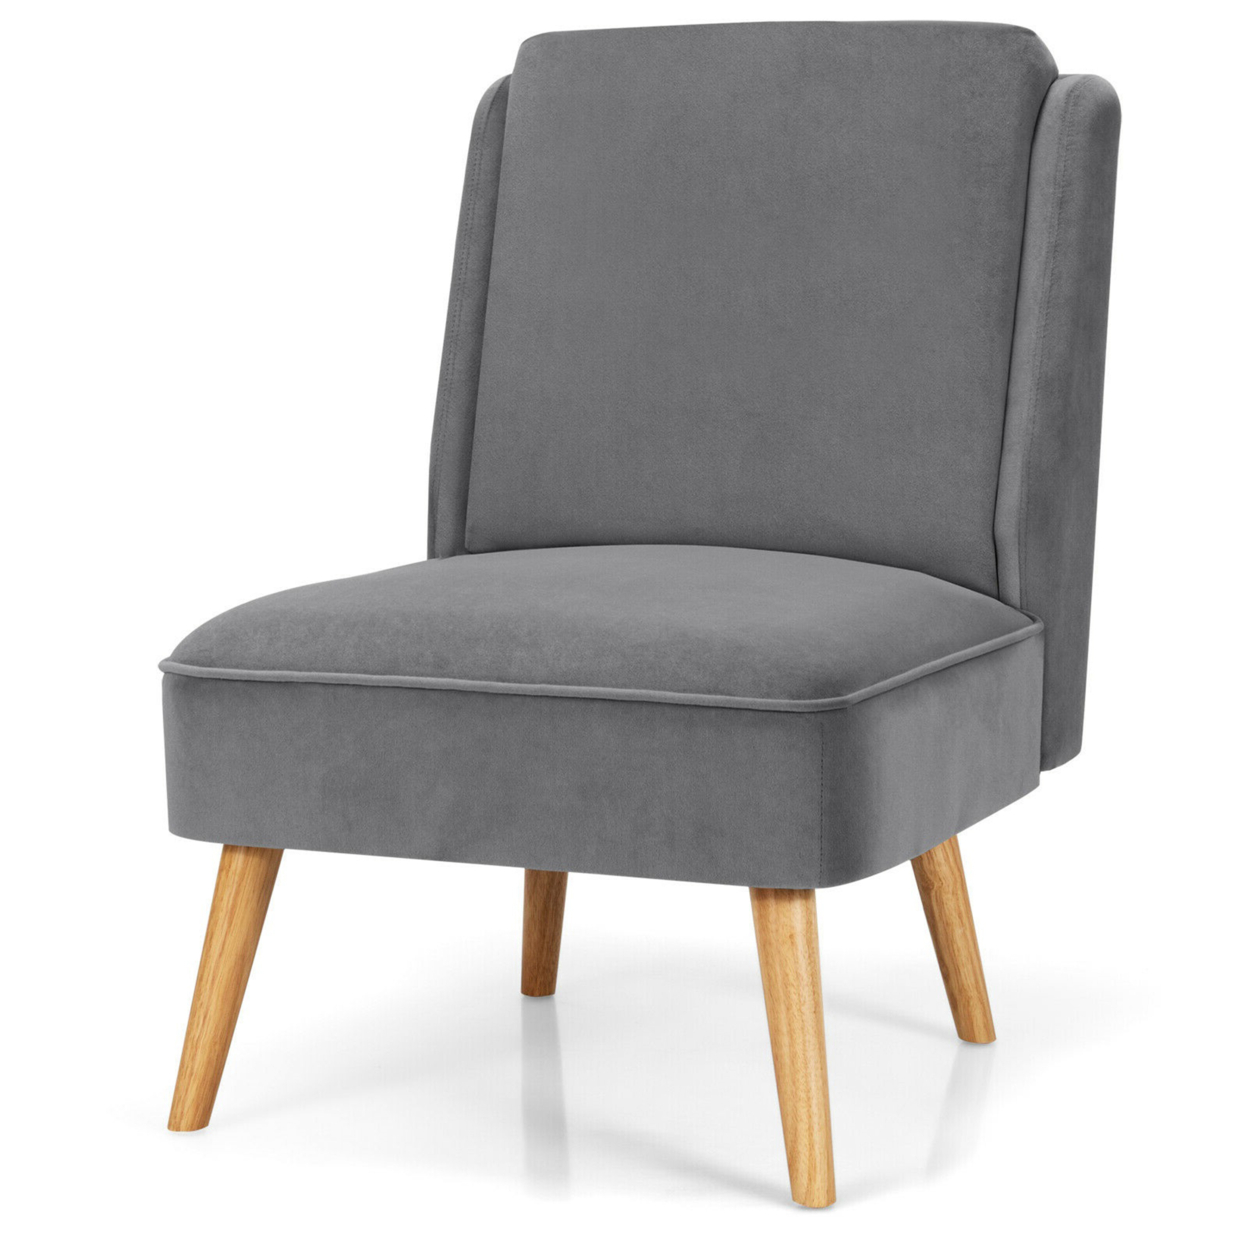 Velvet Accent Chair Single Sofa Chair Leisure Chair With Wood Frame Grey